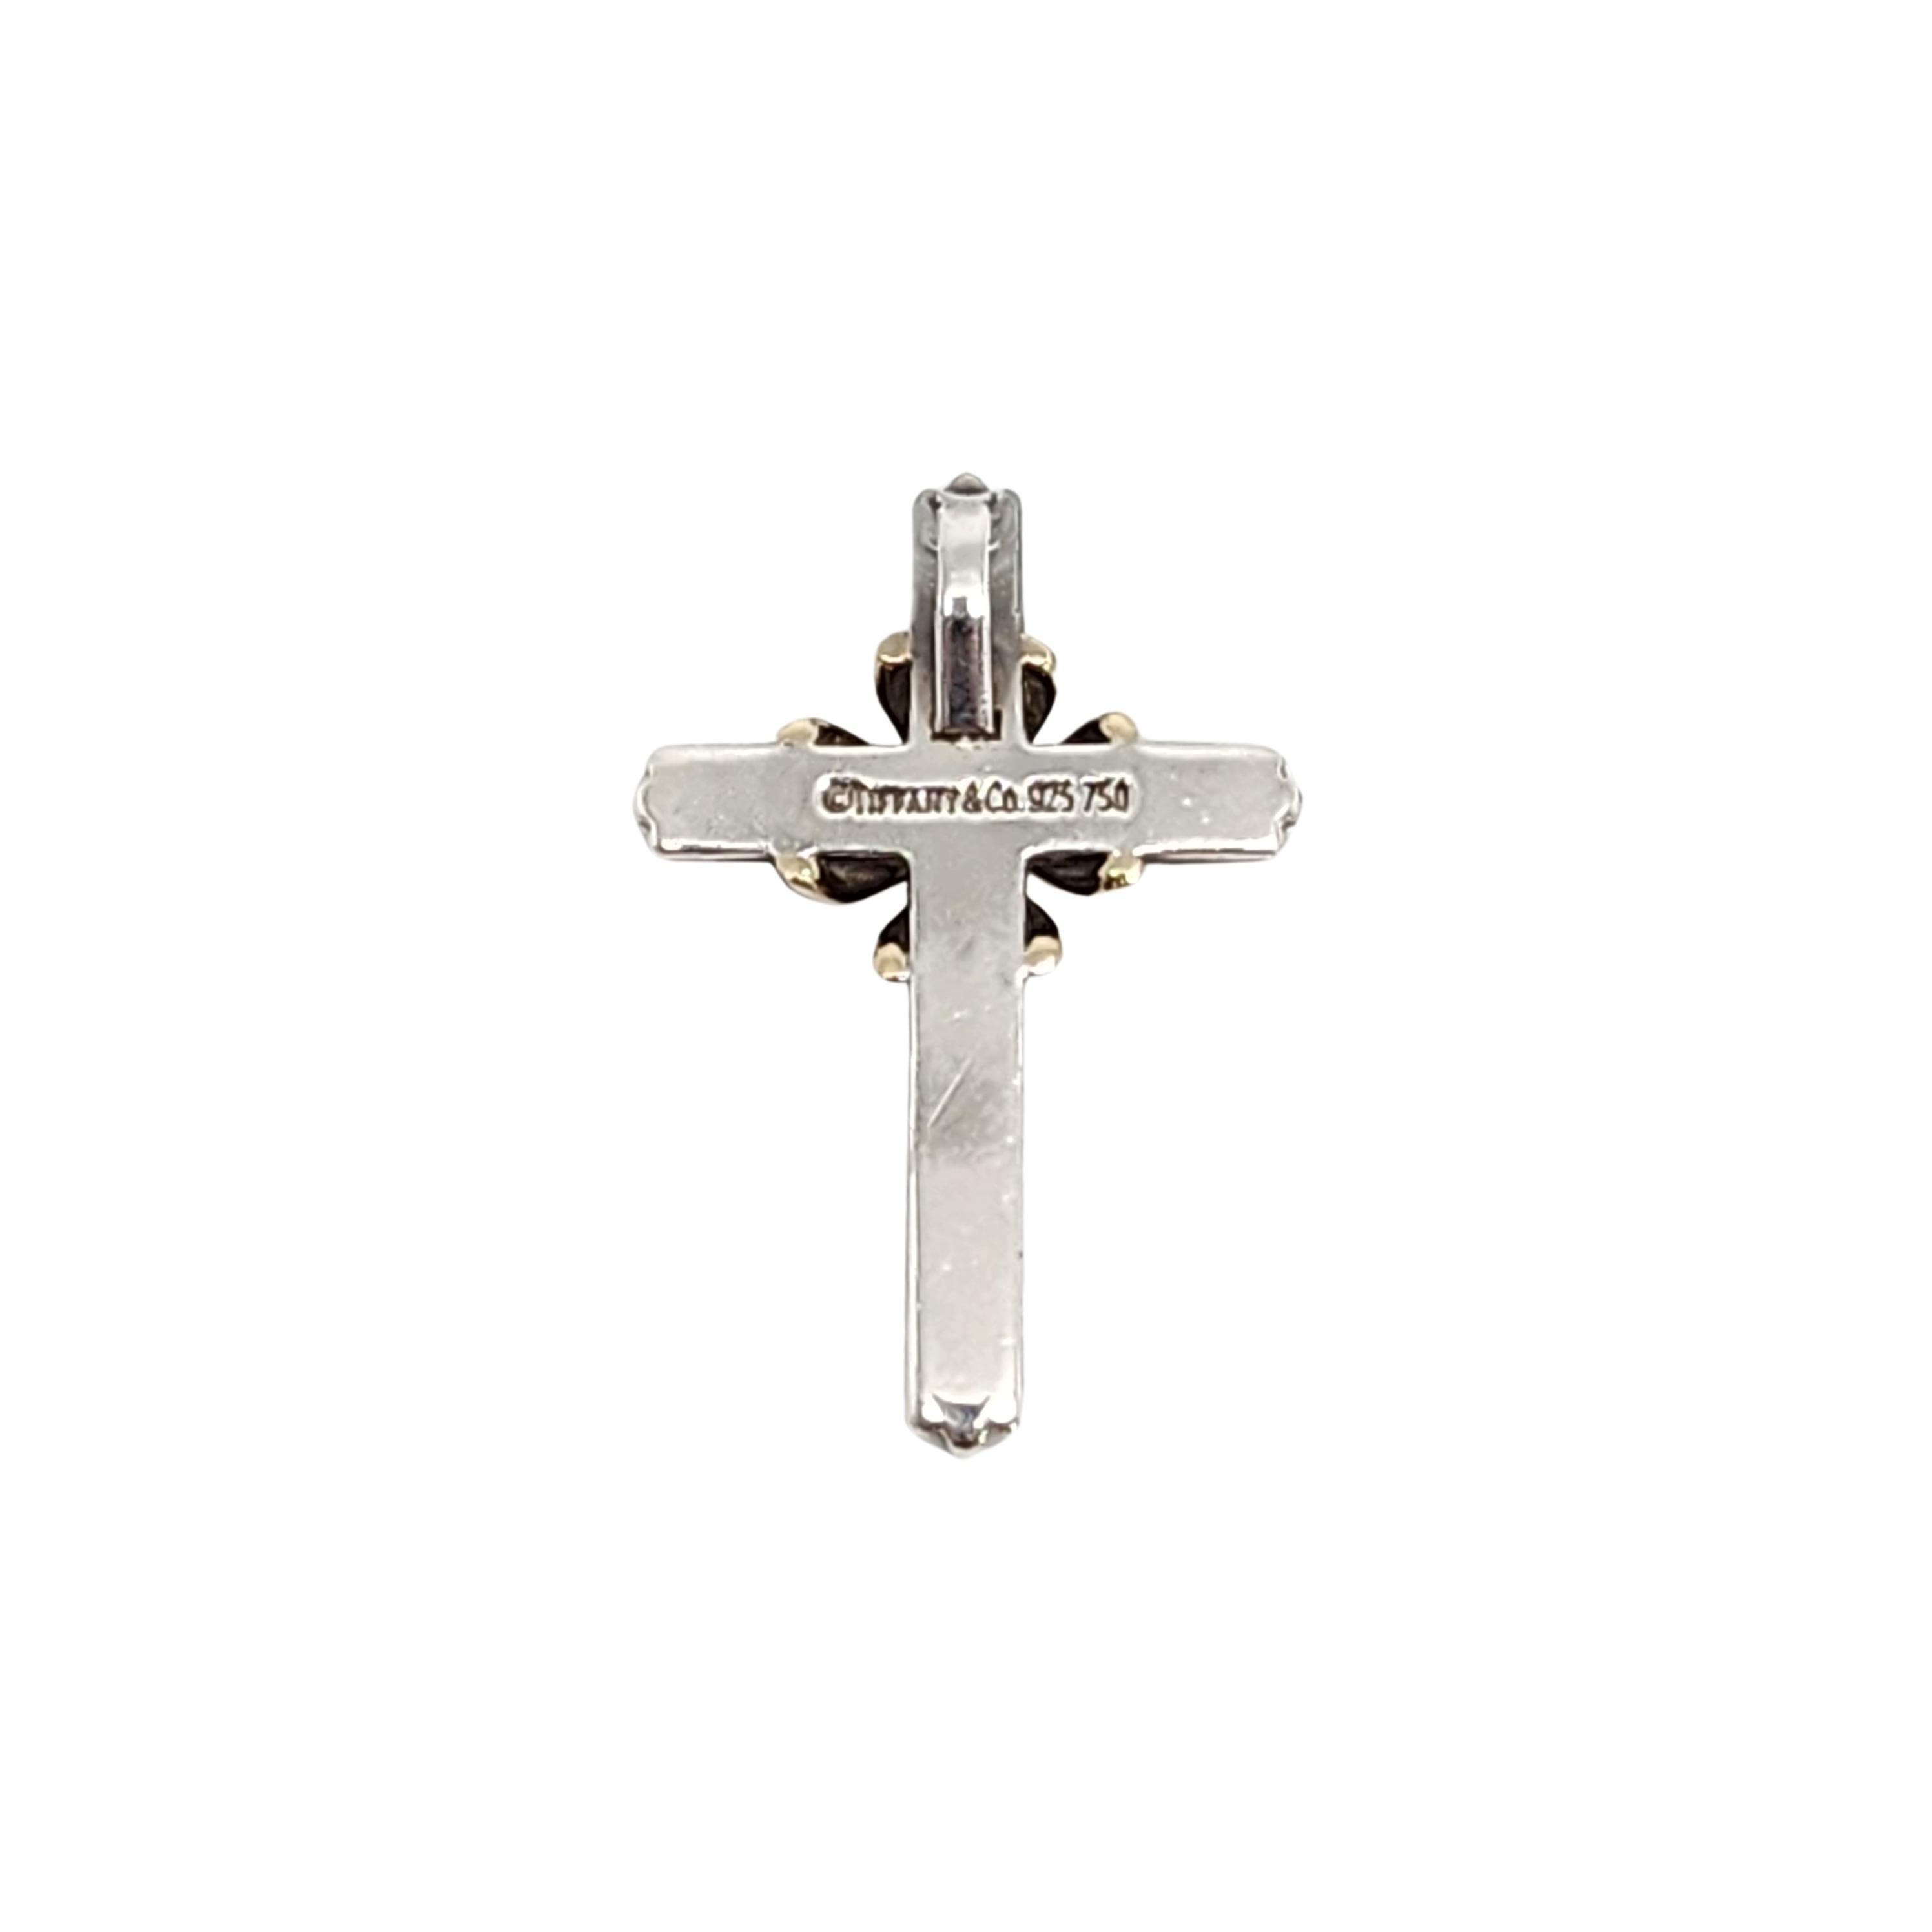 Tiffany & Co sterling silver and 18K yellow gold cross pendant.

Authentic Tiffany pendant in a classic and timeless design, featuring sterling silver cross with 18K yellow gold accent at its center. Does not include Tiffany box and pouch.

Measures